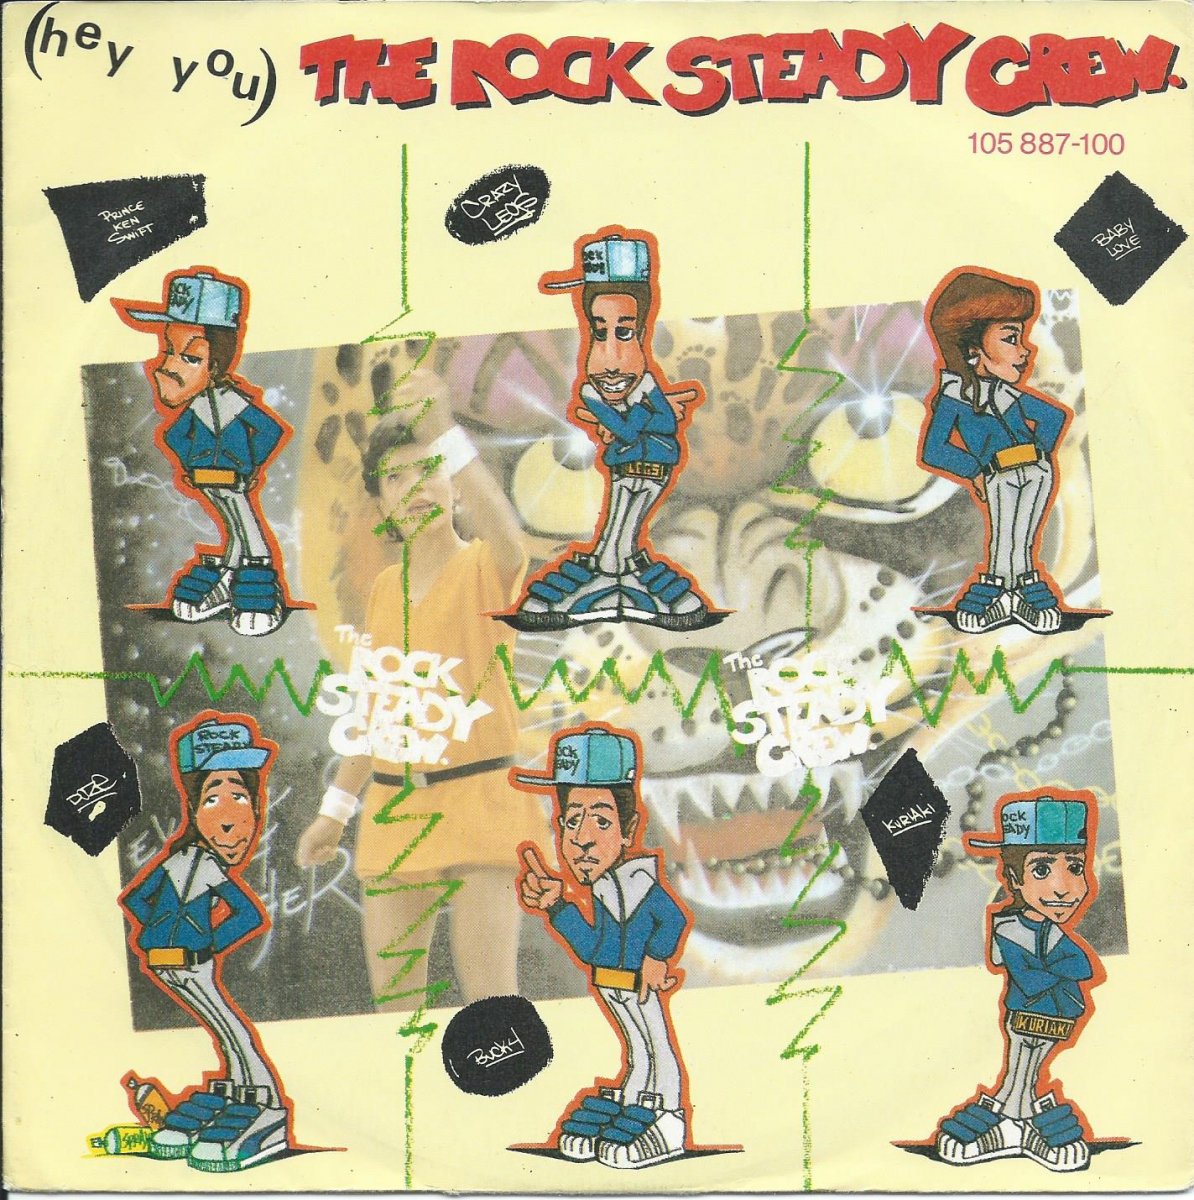 THE ROCK STEADY CREW ‎/ (HEY YOU) THE ROCK STEADY CREW (7